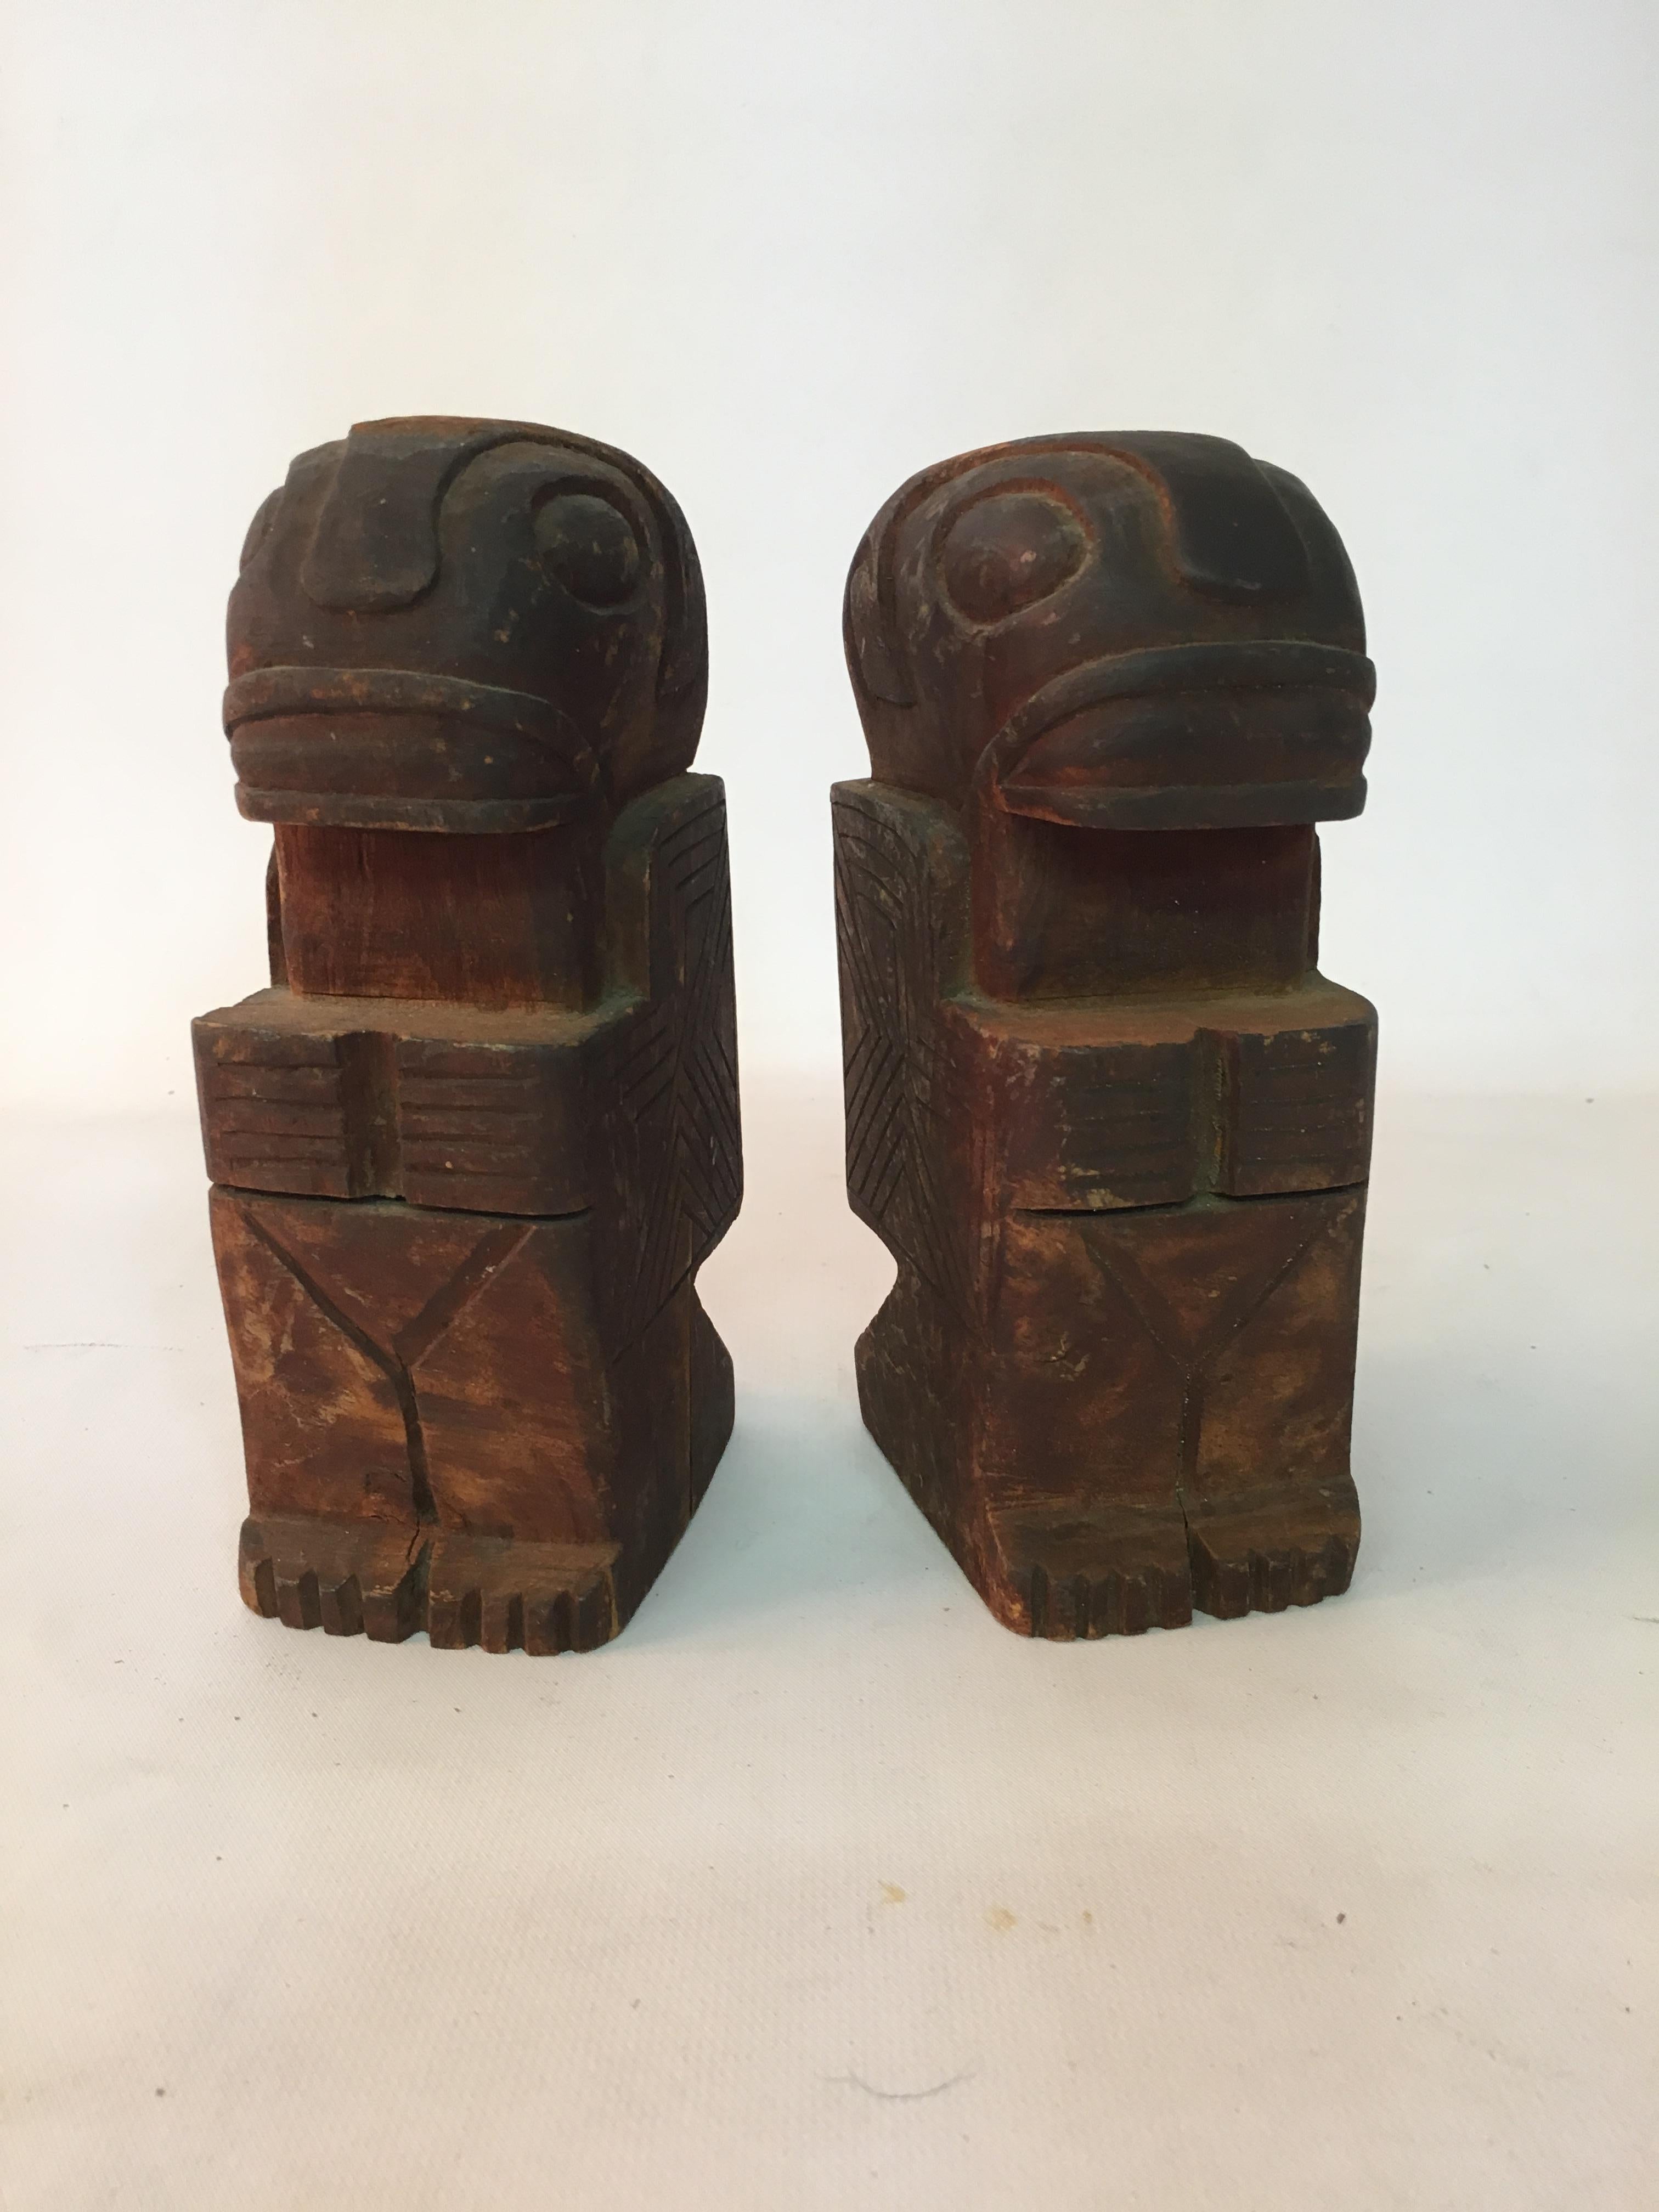 Early Carved Wood Marquesas Islands Votive Figures 3